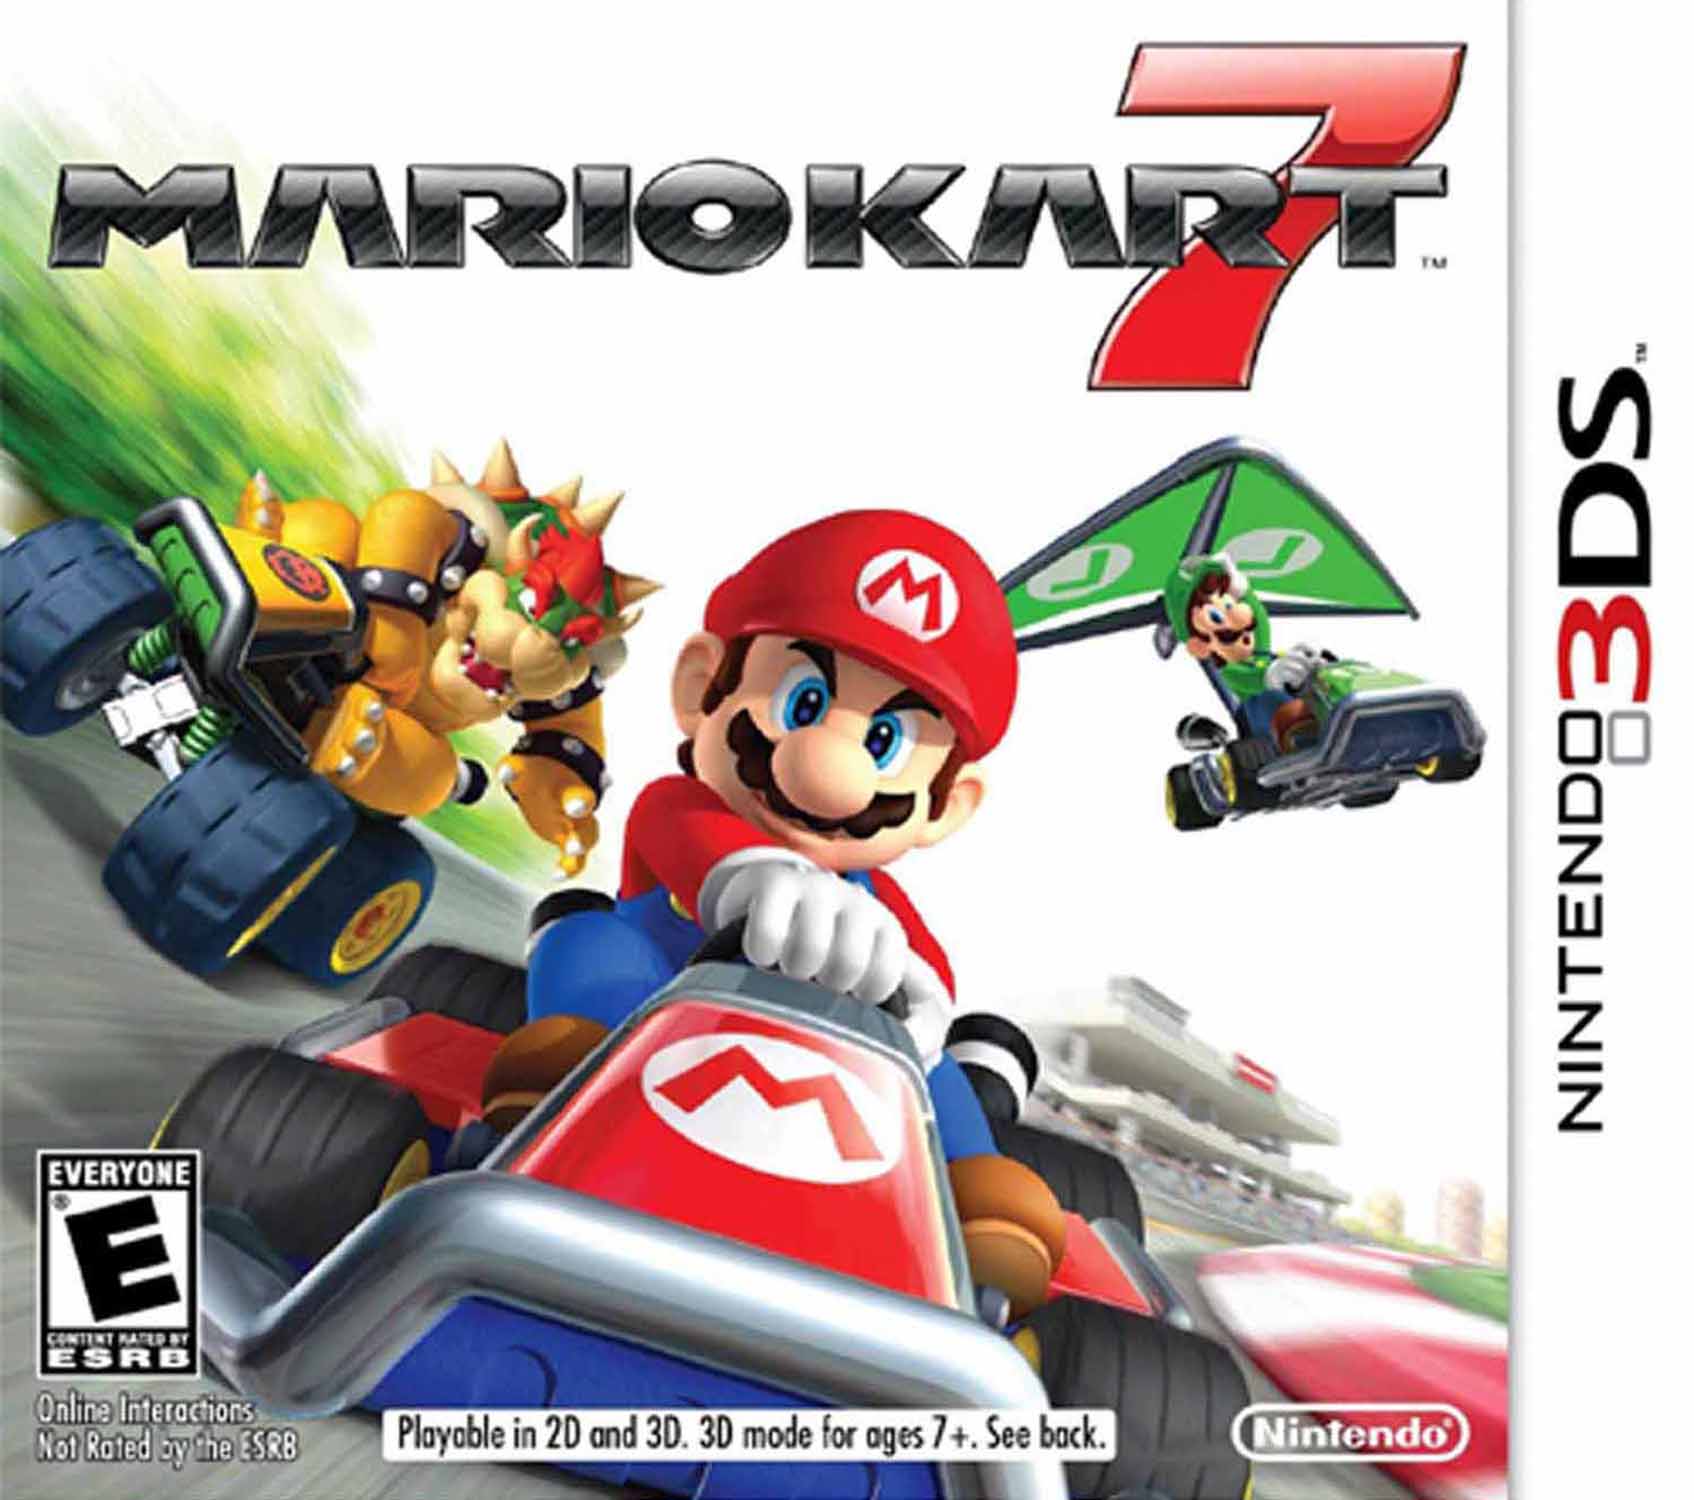 Mario Kart 7, Nintendo 3DS, [Physical Edition], 45496741747 - image 1 of 5